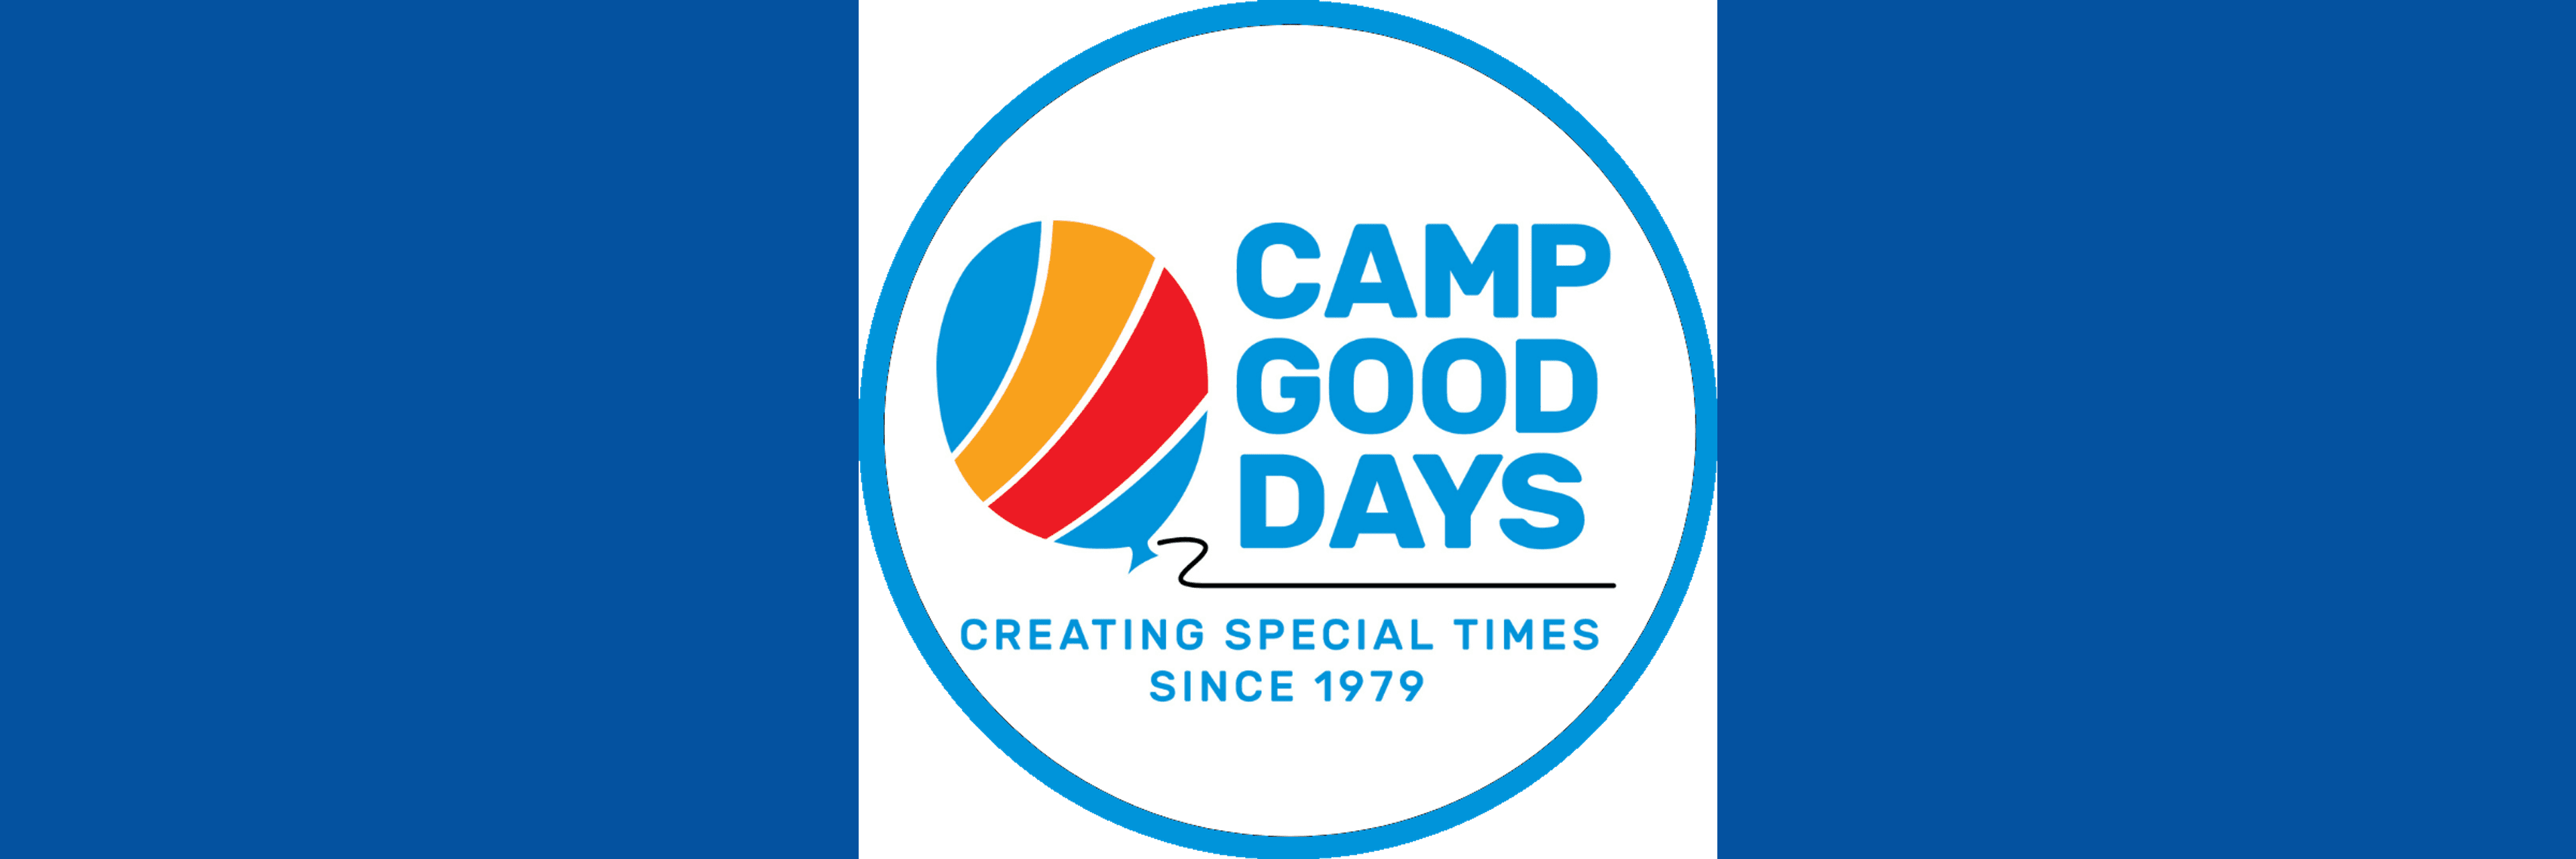 Camp Good Days and Special Times logo